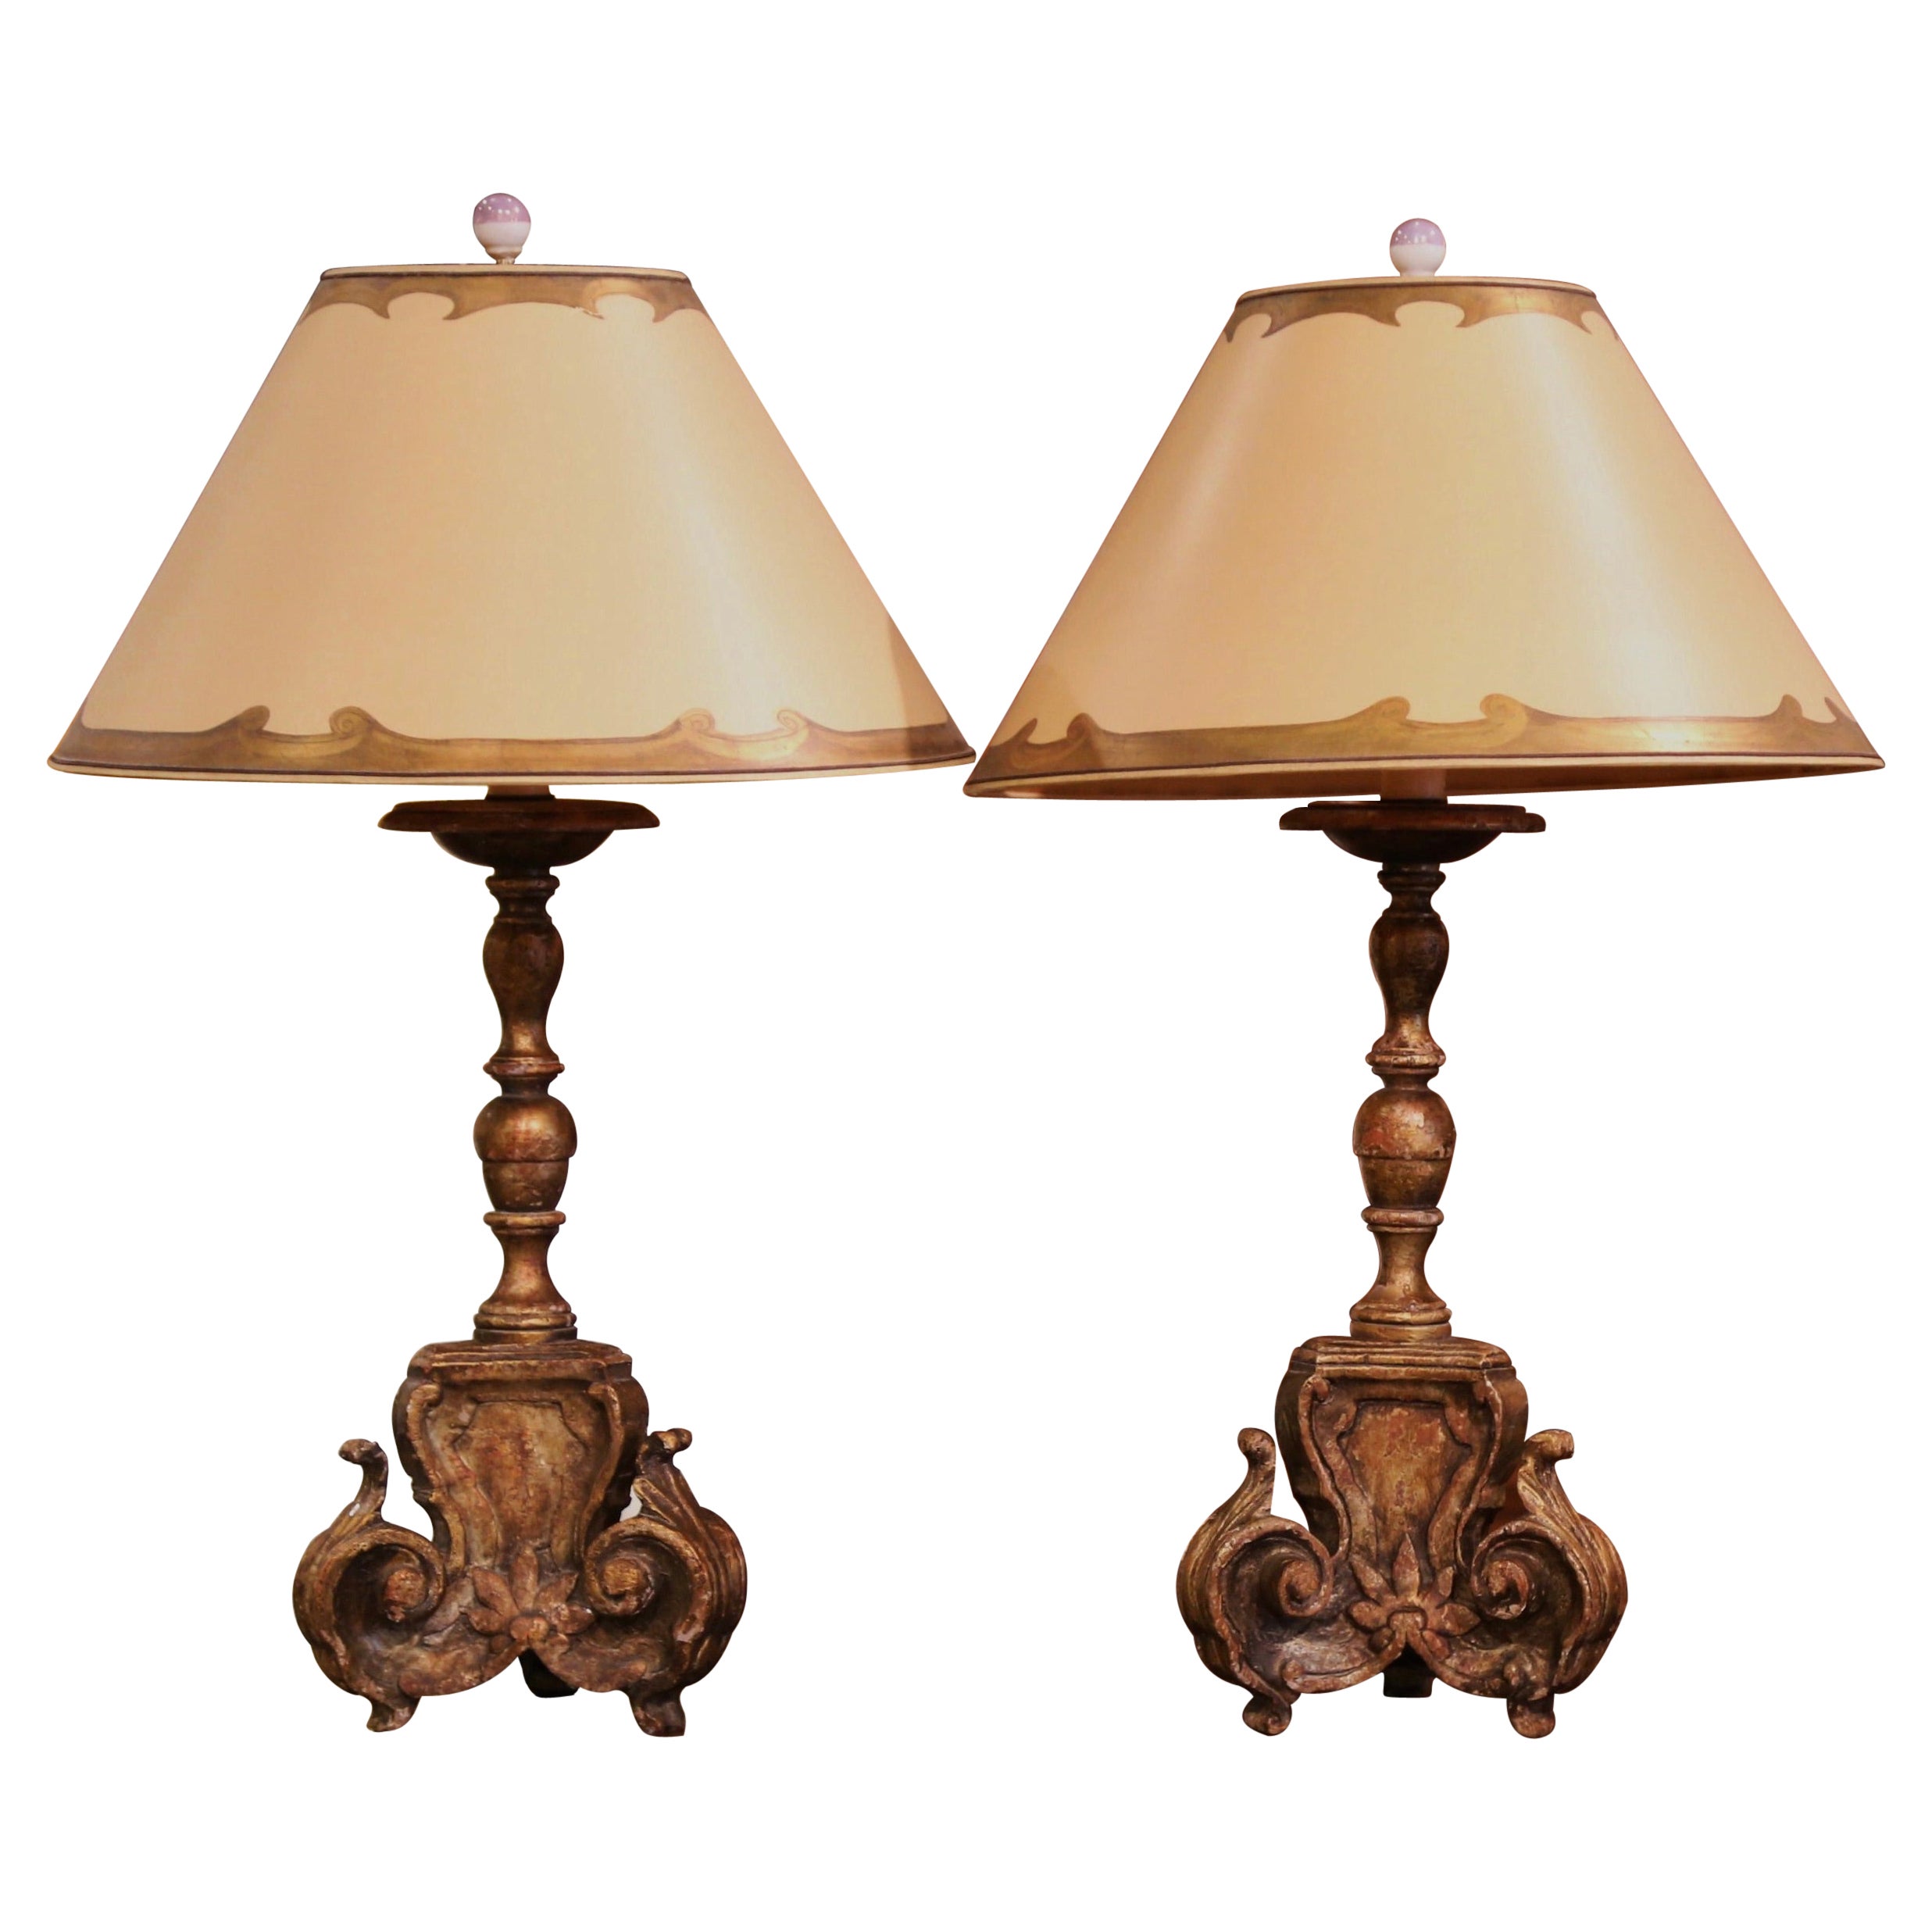 Pair of 19th Century Italian Carved Giltwood Painted Candlestick Table Lamps